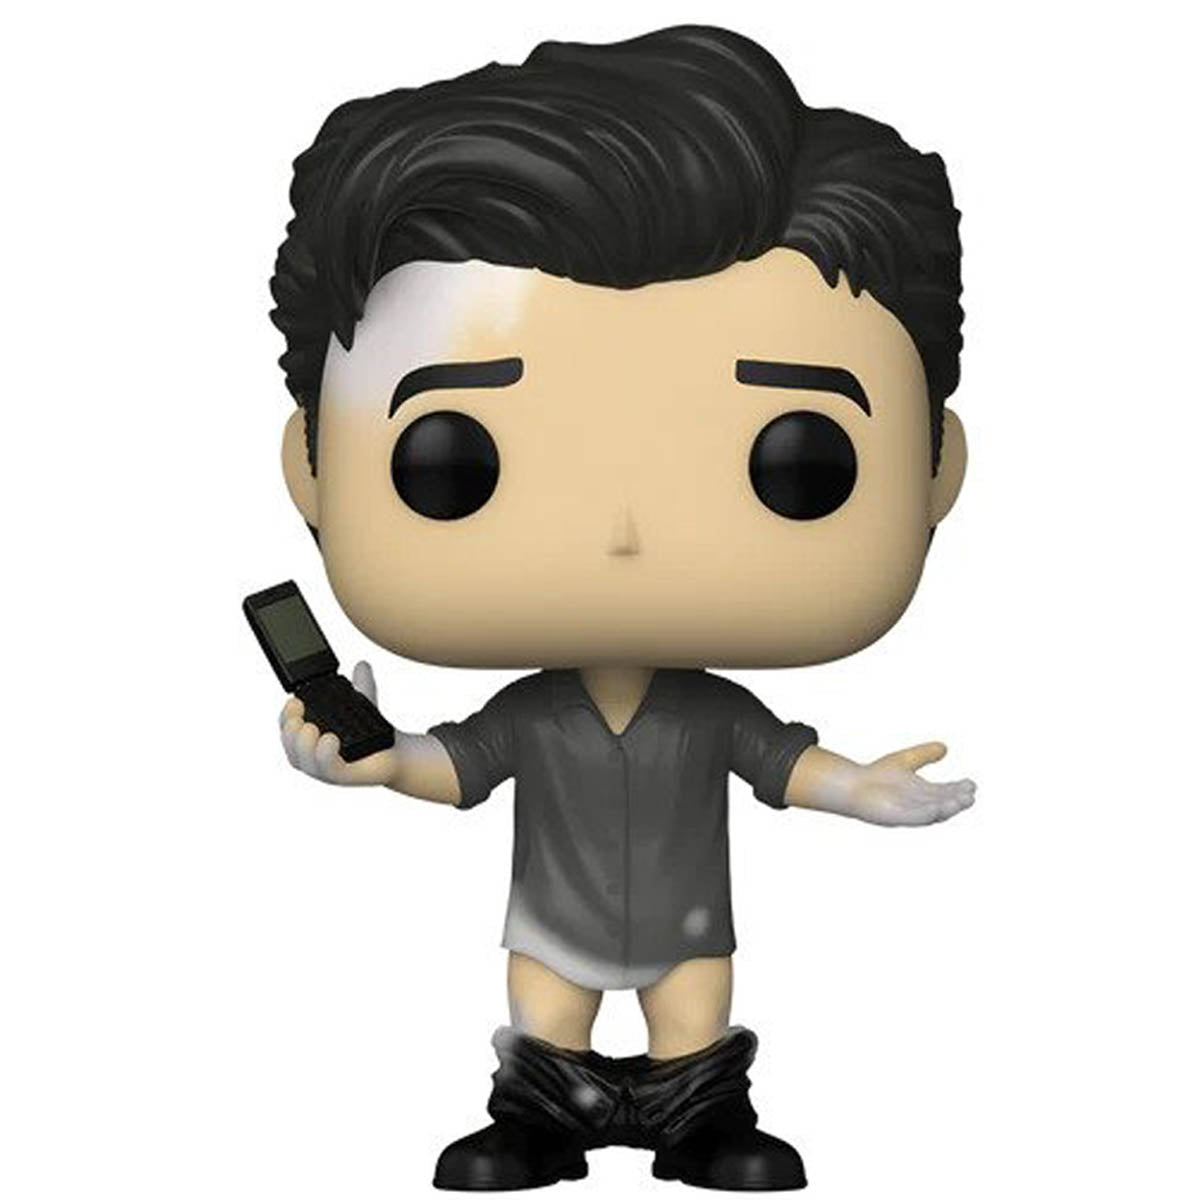 Funko Pop! Television Friends Ross with Leather Pants 3.75-Inch Vinyl Figure - FU65678